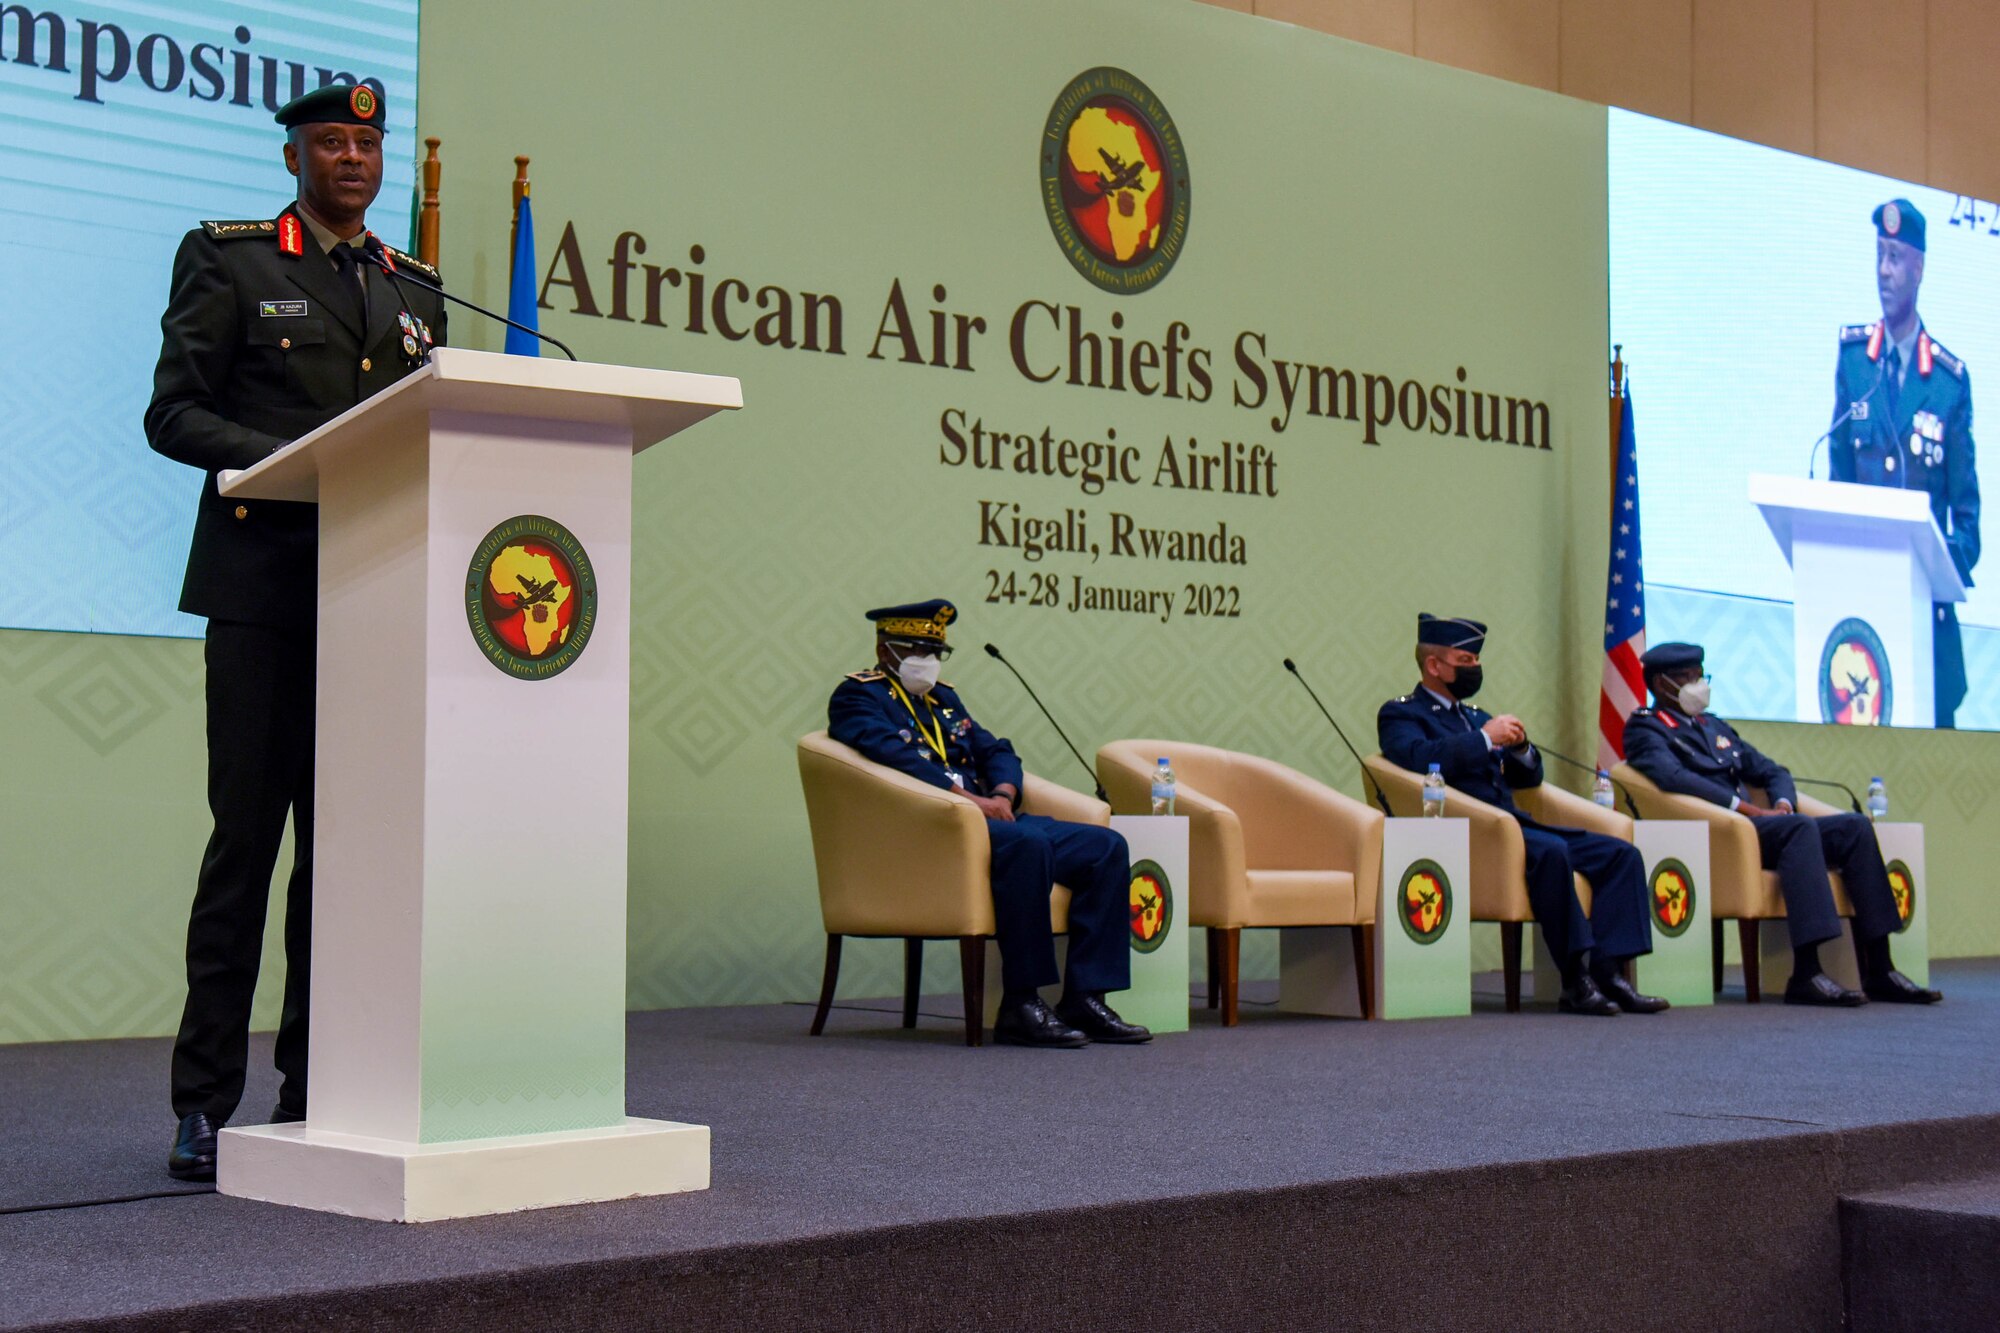 Rwandan Gen. Jean Bosco Kazura, Rwanda Defence Force Chief of Defence Staff, gives closing remarks at the 2022 African Air Chiefs Symposium in Kigali, Rwanda, Jan. 28, 2022. AACS 22 was focused on strategic airlift, an idea that takes planning, multinational coordination and efficient use of available resources to ensure strategic airlift is executed successfully on the continent. (U.S. Air Force photo by Senior Airman Brooke Moeder)